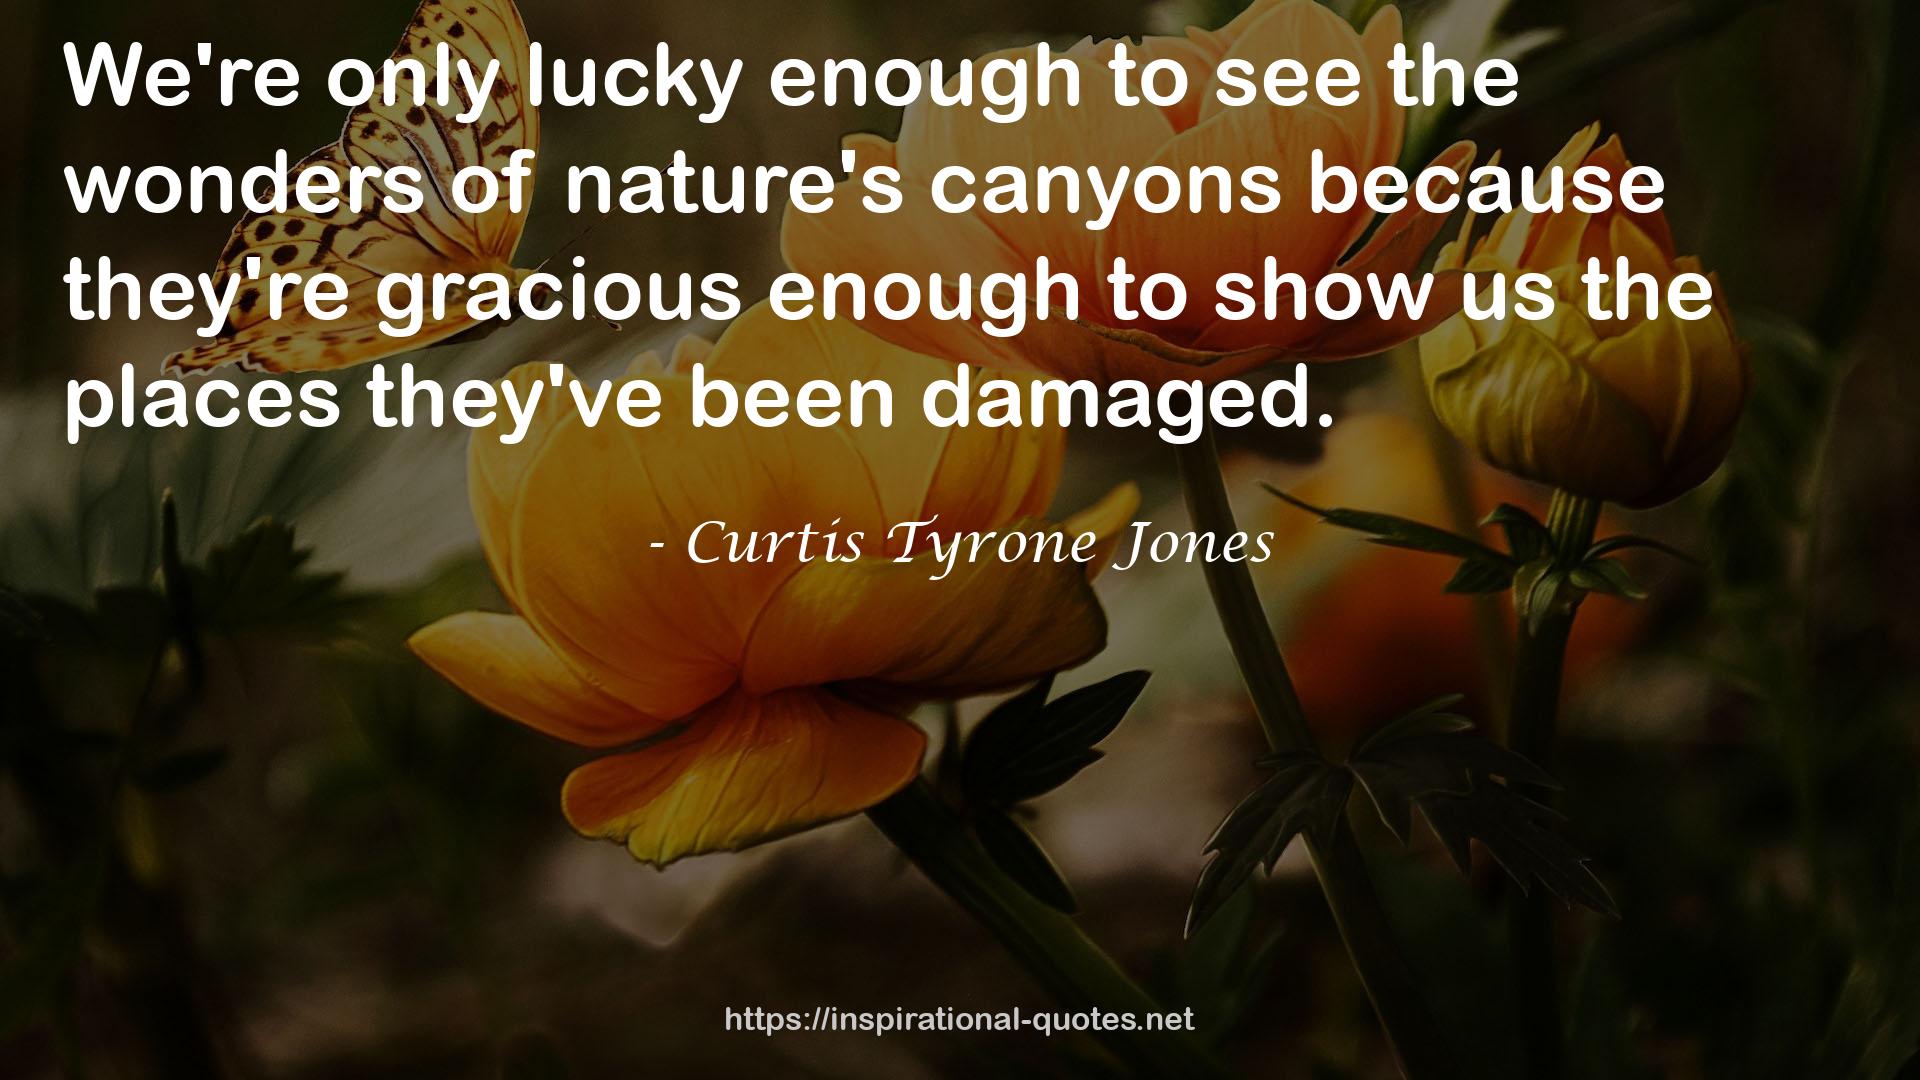 nature's canyons  QUOTES